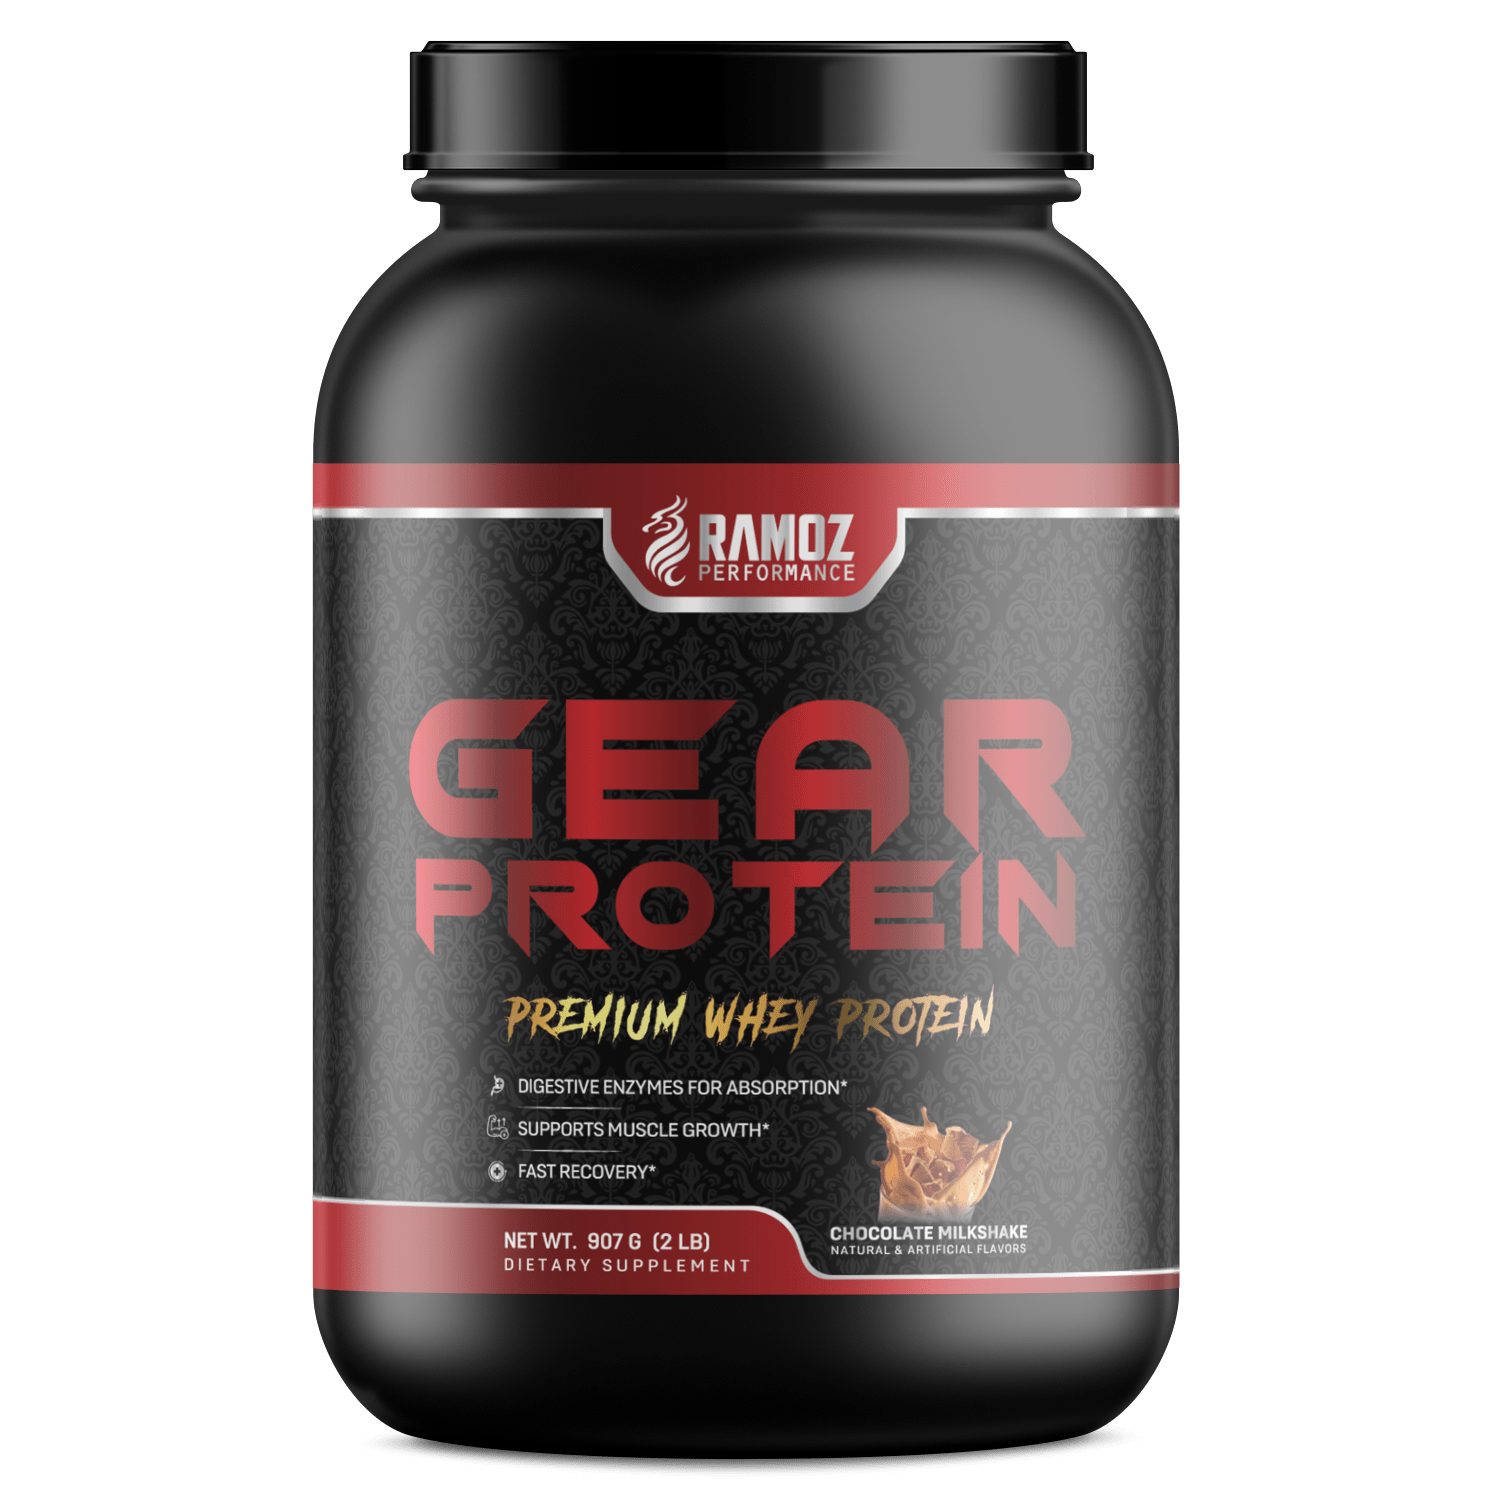 GEAR PROTEIN 2lb Chocolate